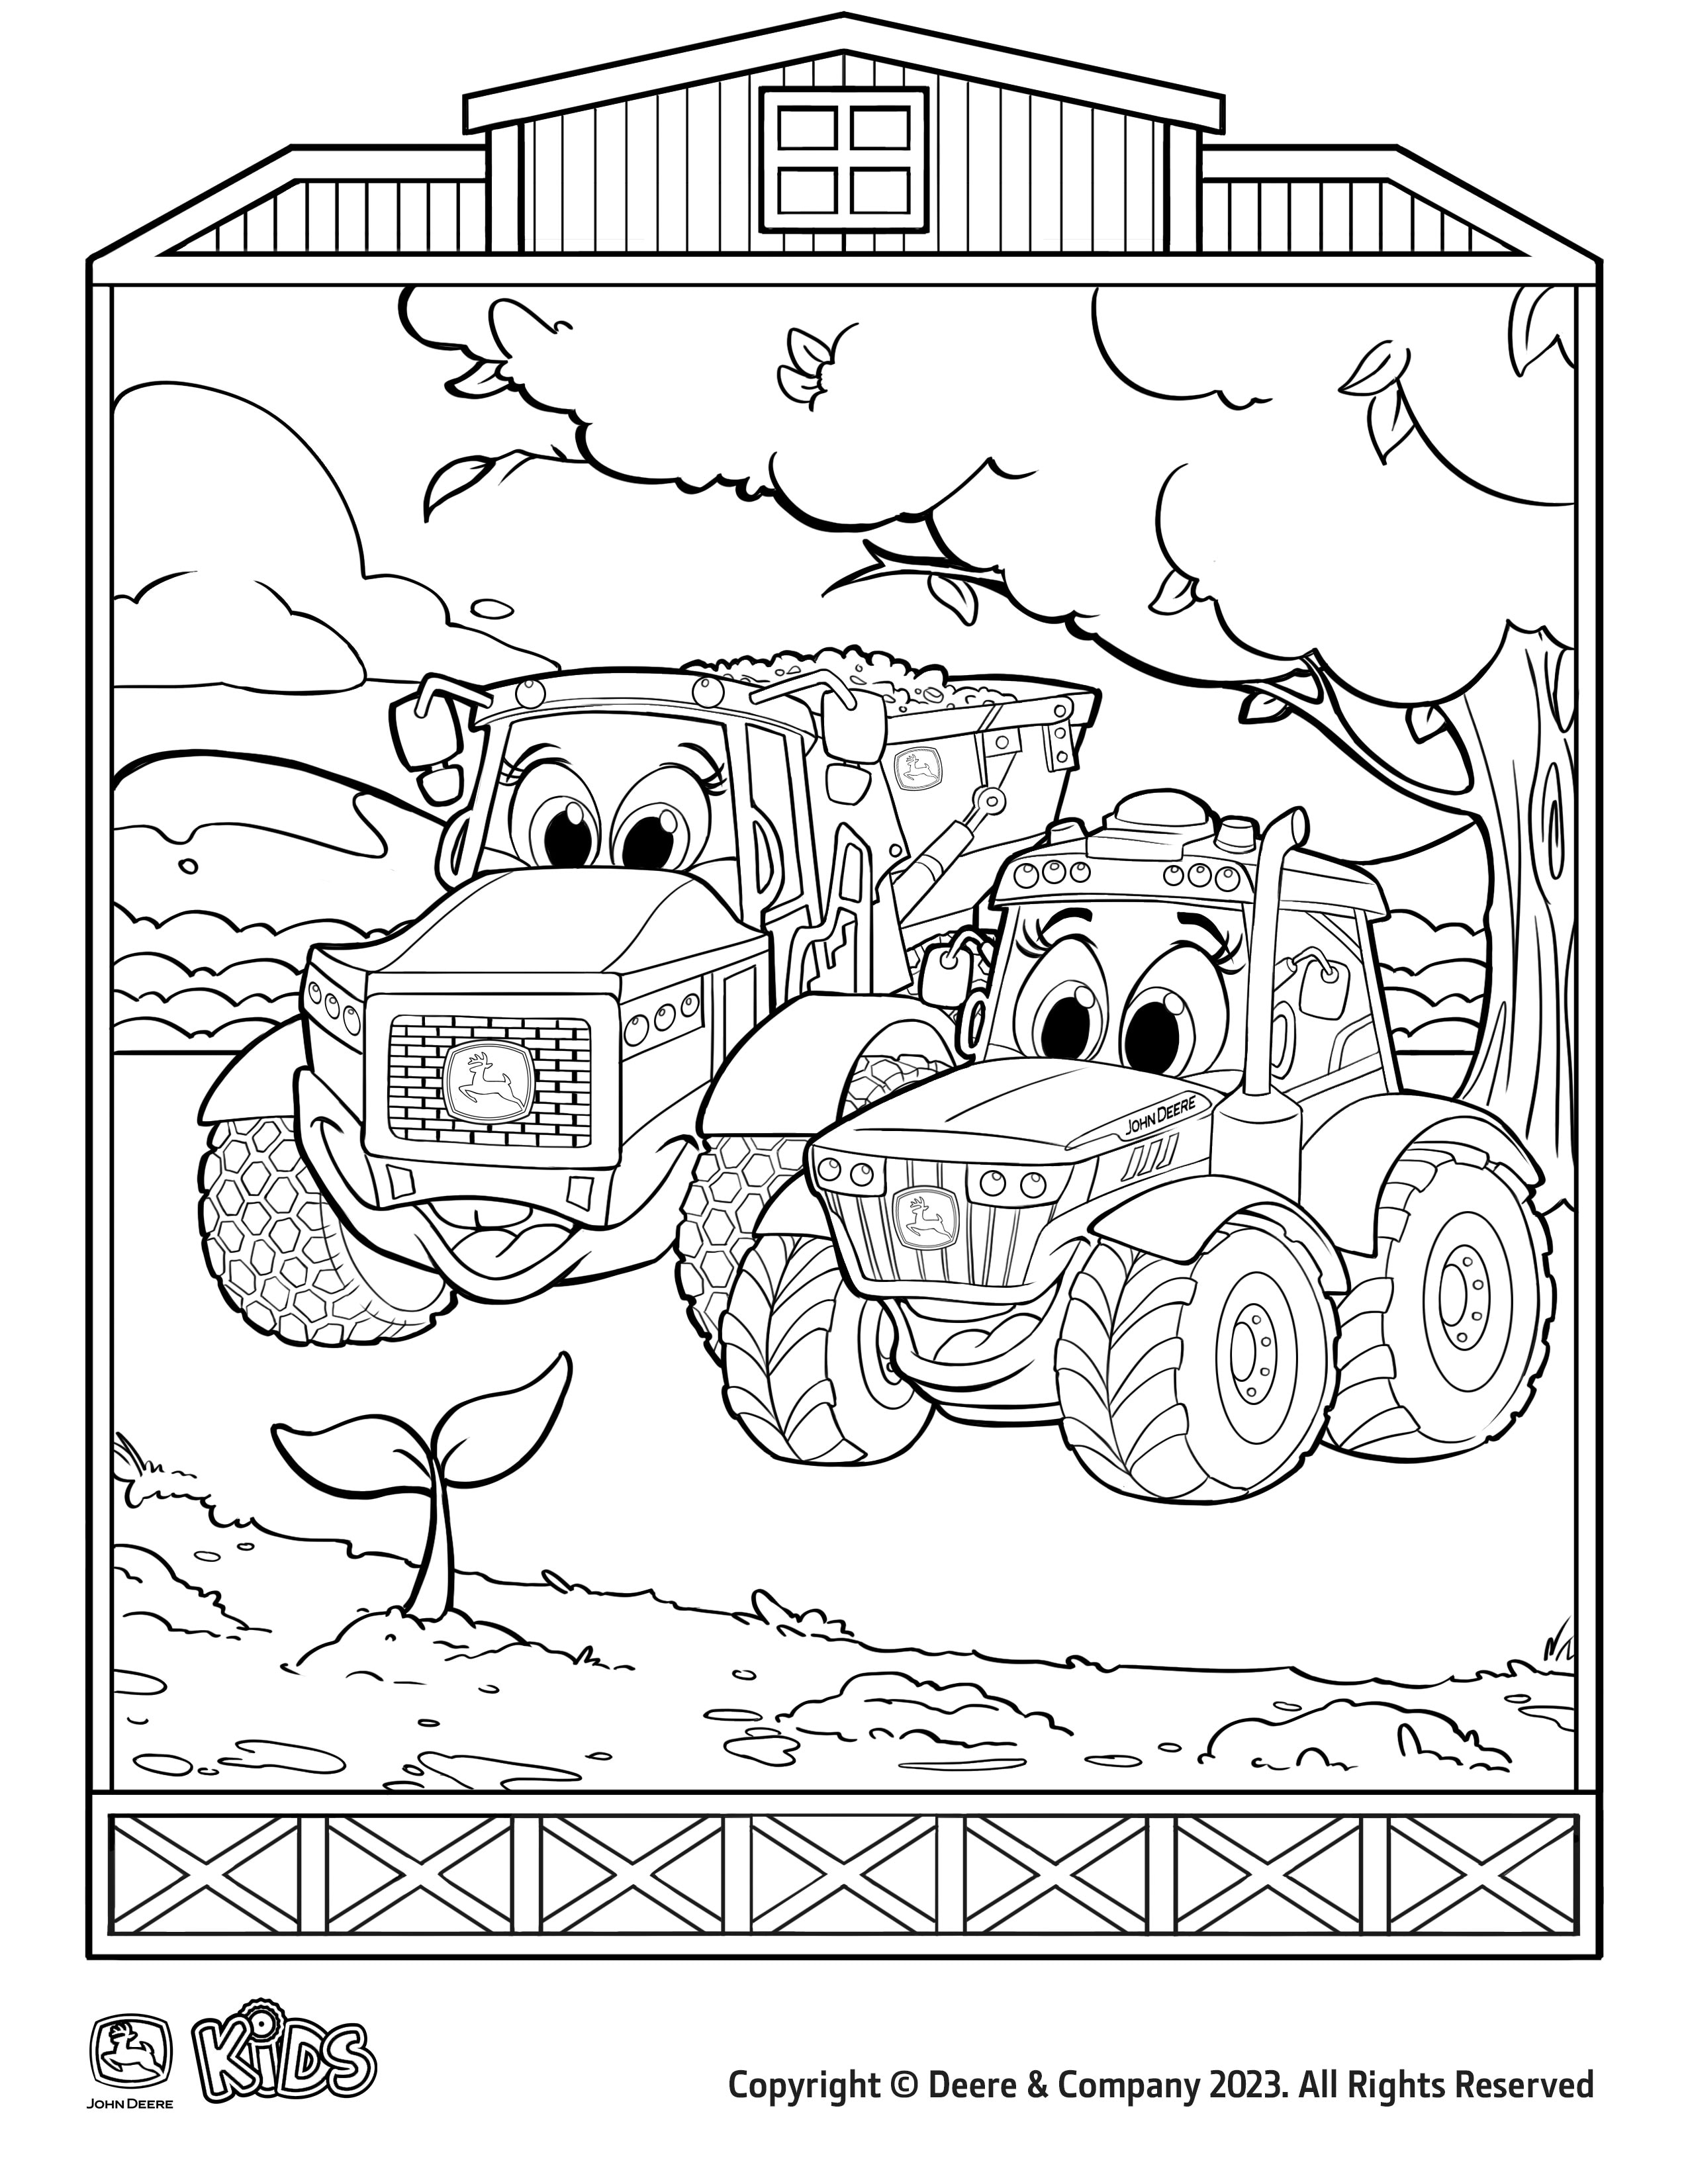 https://www.deere.com/assets/images/common/connect-with-john-deere/coloring-page-3-print.jpg